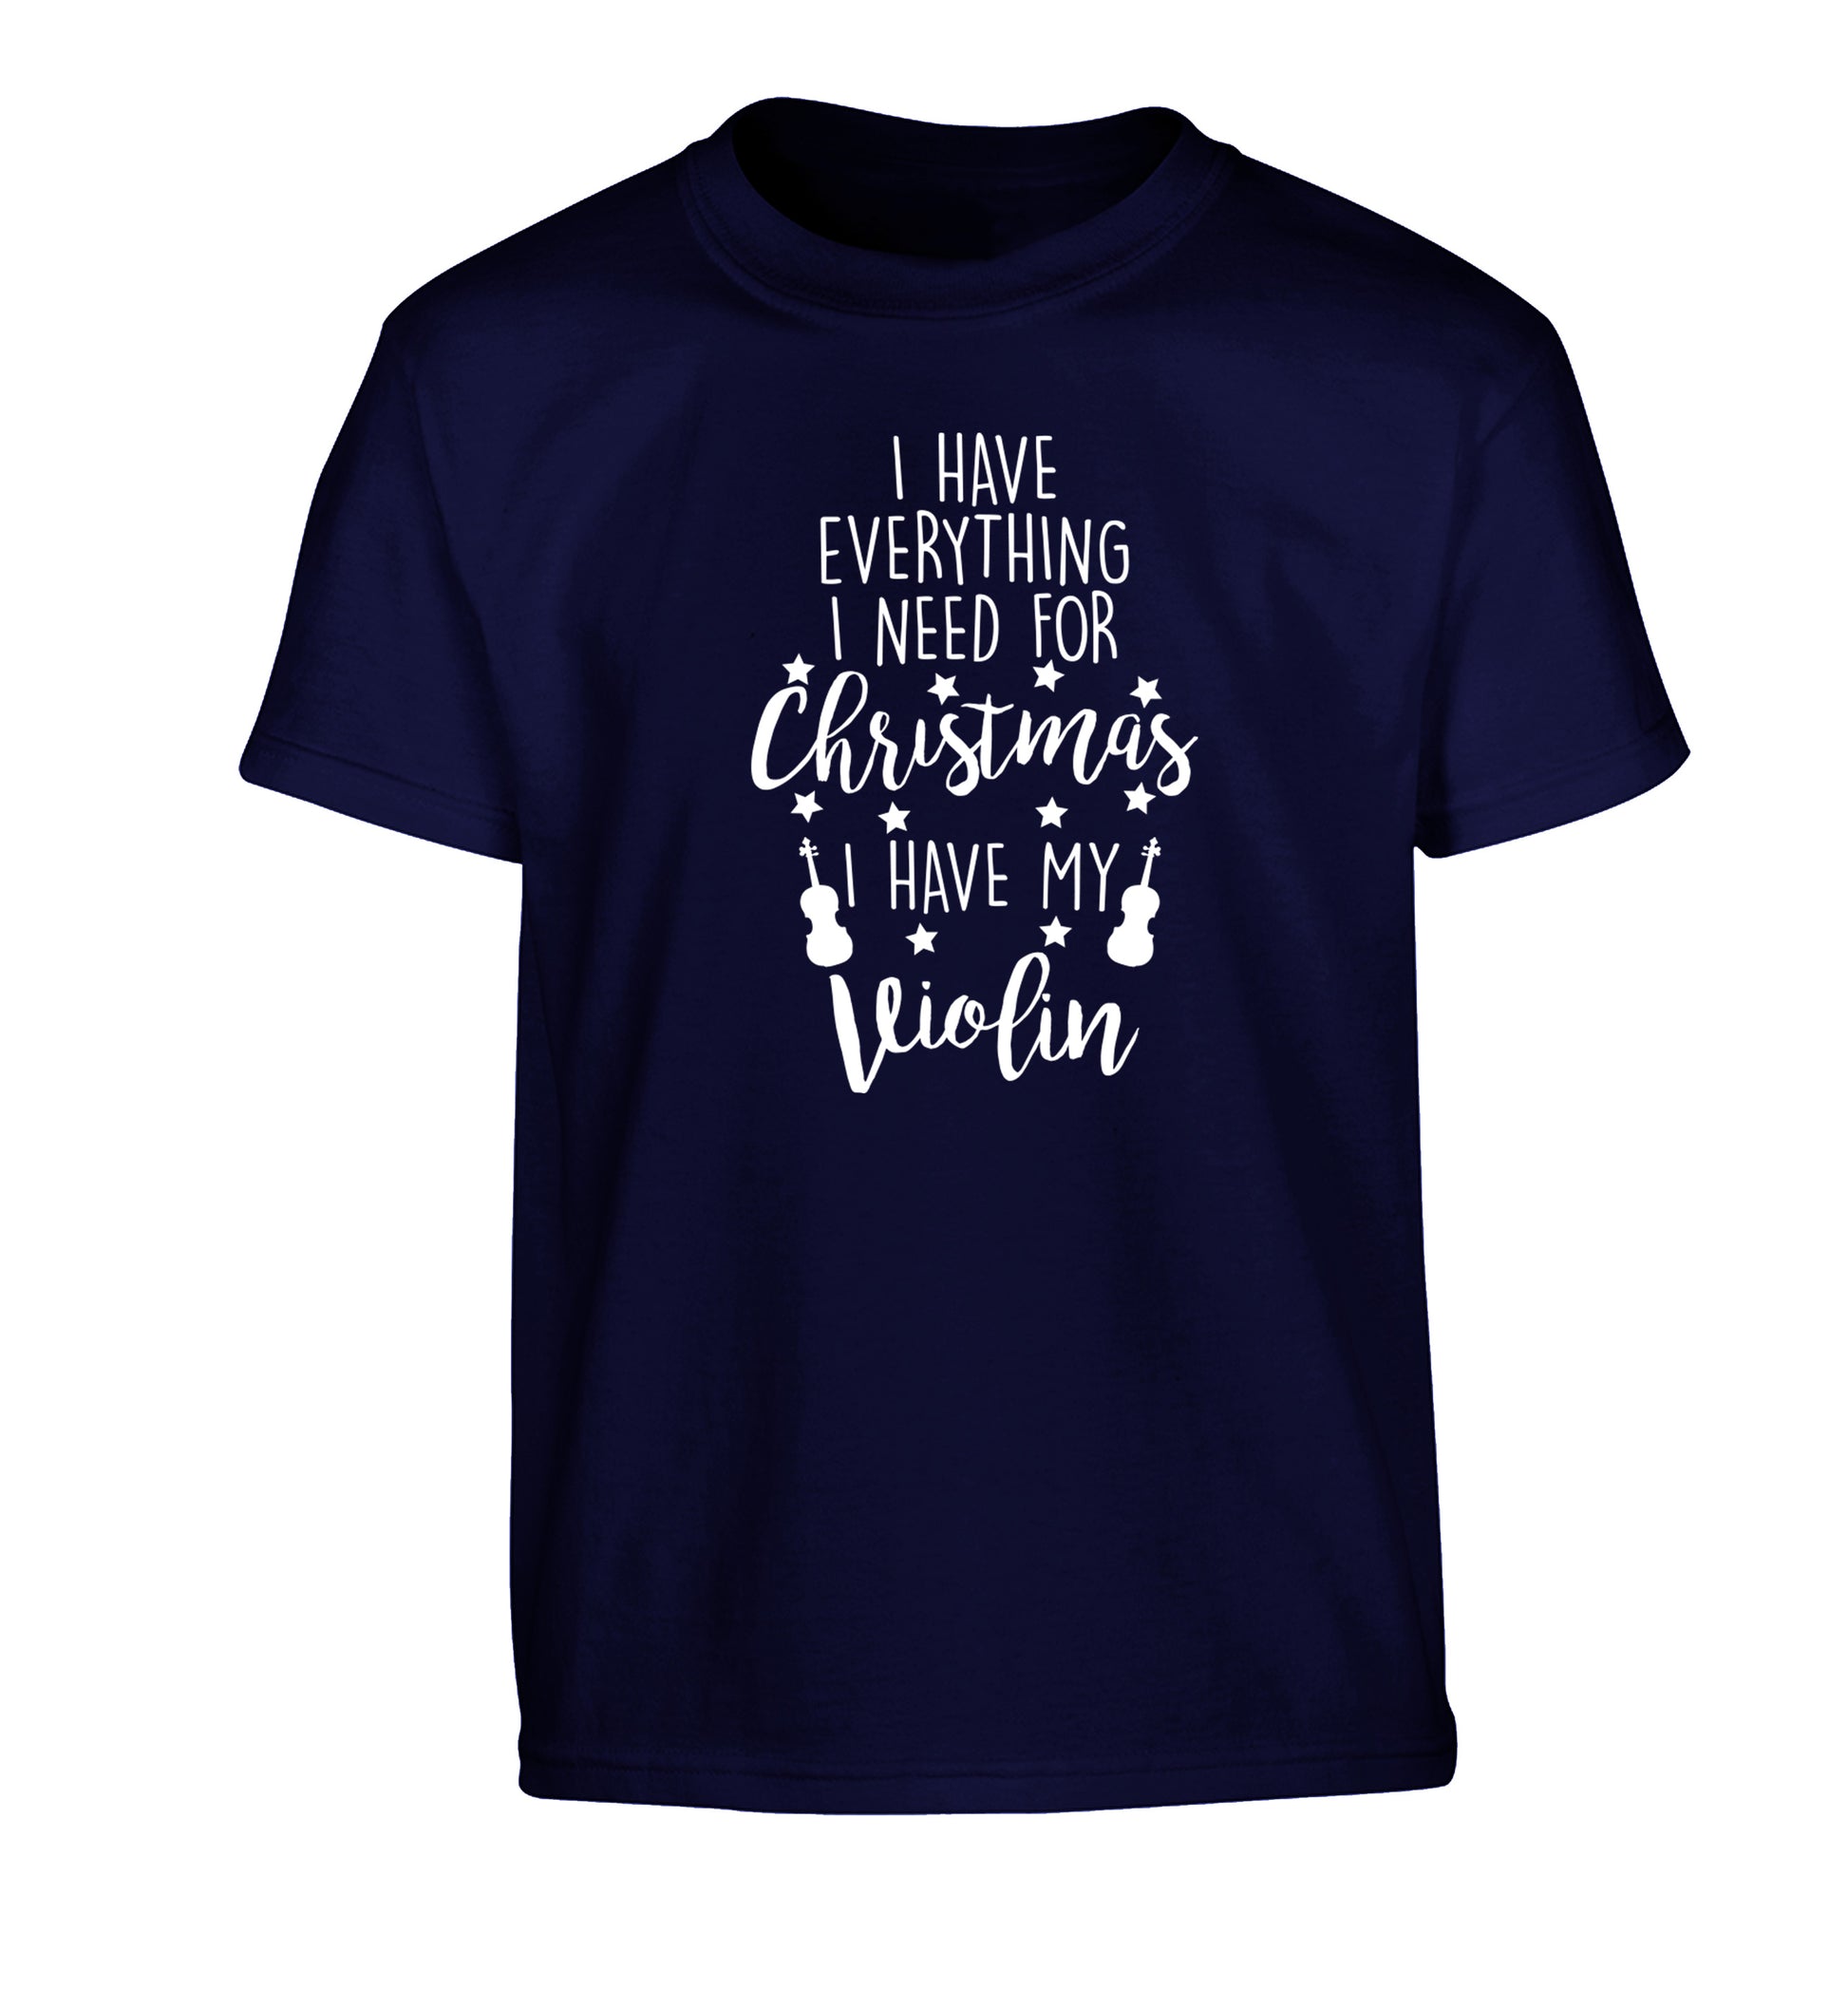 I have everything I need for Christmas I have my violin Children's navy Tshirt 12-13 Years